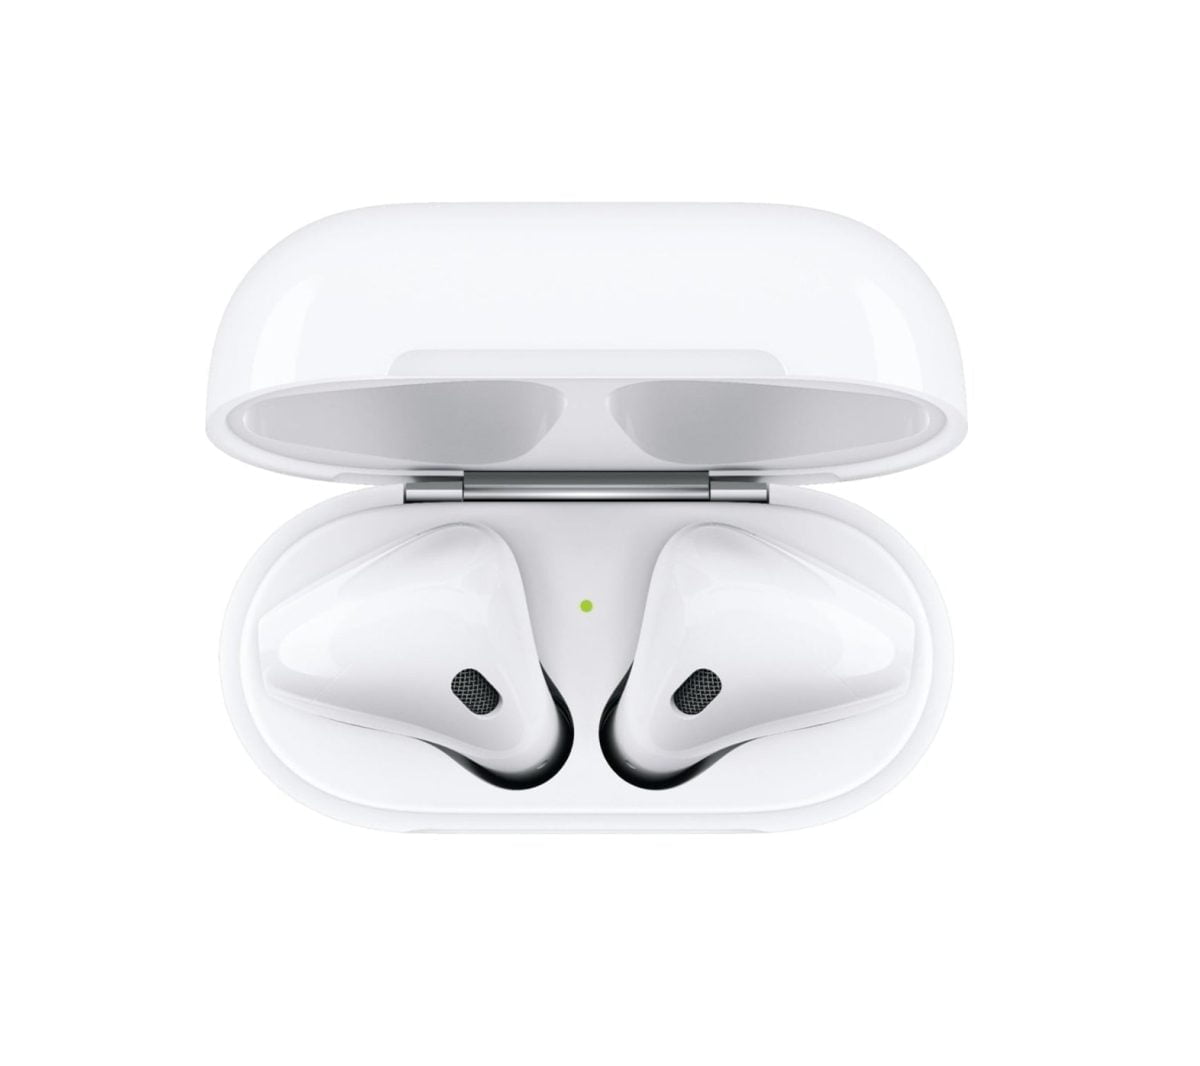 6084400Cv11D Apple &Lt;Div&Gt; &Lt;H1&Gt;Apple Airpods With Wireless Charging Case - White Model Mrxj2Am/A&Lt;/H1&Gt; &Lt;Div&Gt;Airpods Combine Intelligent Design With Breakthrough Technology And Crystal-Clear Sound. Powered By The New Apple H1 Headphone Chip, Airpods Now Feature Hands-Free Access To Siri Using Just Your Voice. And Up To 3 Hours Of Talk Time On A Single Charge.&Lt;/Div&Gt; &Lt;/Div&Gt; &Lt;Div&Gt; &Lt;Div Class=&Quot;List-Row&Quot;&Gt; &Lt;Ul&Gt; &Lt;Li Class=&Quot;Body-Copy&Quot;&Gt;Automatically On, Automatically Connected&Lt;/Li&Gt; &Lt;Li Class=&Quot;Body-Copy&Quot;&Gt;Easy Setup For All Your Apple Devices&Lt;/Li&Gt; &Lt;Li Class=&Quot;Body-Copy&Quot;&Gt;Quick Access To Siri By Saying, Hey Siri&Lt;/Li&Gt; &Lt;Li Class=&Quot;Body-Copy&Quot;&Gt;Double-Tap To Play Or Skip Forward&Lt;/Li&Gt; &Lt;Li Class=&Quot;Body-Copy&Quot;&Gt;New Apple H1 Headphone Chip Delivers A Faster Wireless Connection To Your Devices&Lt;/Li&Gt; &Lt;Li Class=&Quot;Body-Copy&Quot;&Gt;Charges Quickly In The Case&Lt;/Li&Gt; &Lt;Li Class=&Quot;Body-Copy&Quot;&Gt;Case Can Be Charged Using The Lightning Connector&Lt;/Li&Gt; &Lt;Li Class=&Quot;Body-Copy&Quot;&Gt;Rich, High-Quality Audio And Voice&Lt;/Li&Gt; &Lt;Li Class=&Quot;Body-Copy&Quot;&Gt;Seamless Switching Between Devices&Lt;/Li&Gt; &Lt;Li Class=&Quot;Body-Copy&Quot;&Gt;Listen And Talk All Day With Multiple Charges From The Charging Case&Lt;/Li&Gt; &Lt;/Ul&Gt; &Lt;/Div&Gt; &Lt;Div Class=&Quot;List-Row&Quot;&Gt;&Lt;/Div&Gt; &Lt;Div Class=&Quot;List-Row&Quot;&Gt; &Lt;P Class=&Quot;Body-Copy&Quot;&Gt;&Lt;Span Style=&Quot;Font-Family: Consolas, Monaco, Monospace&Quot;&Gt;One Year Apple Warranty&Lt;/Span&Gt;&Lt;/P&Gt; &Lt;/Div&Gt; &Lt;/Div&Gt; Apple Airpods Apple Airpods With Wireless Charging Case - White Model Mrxj2Am/A